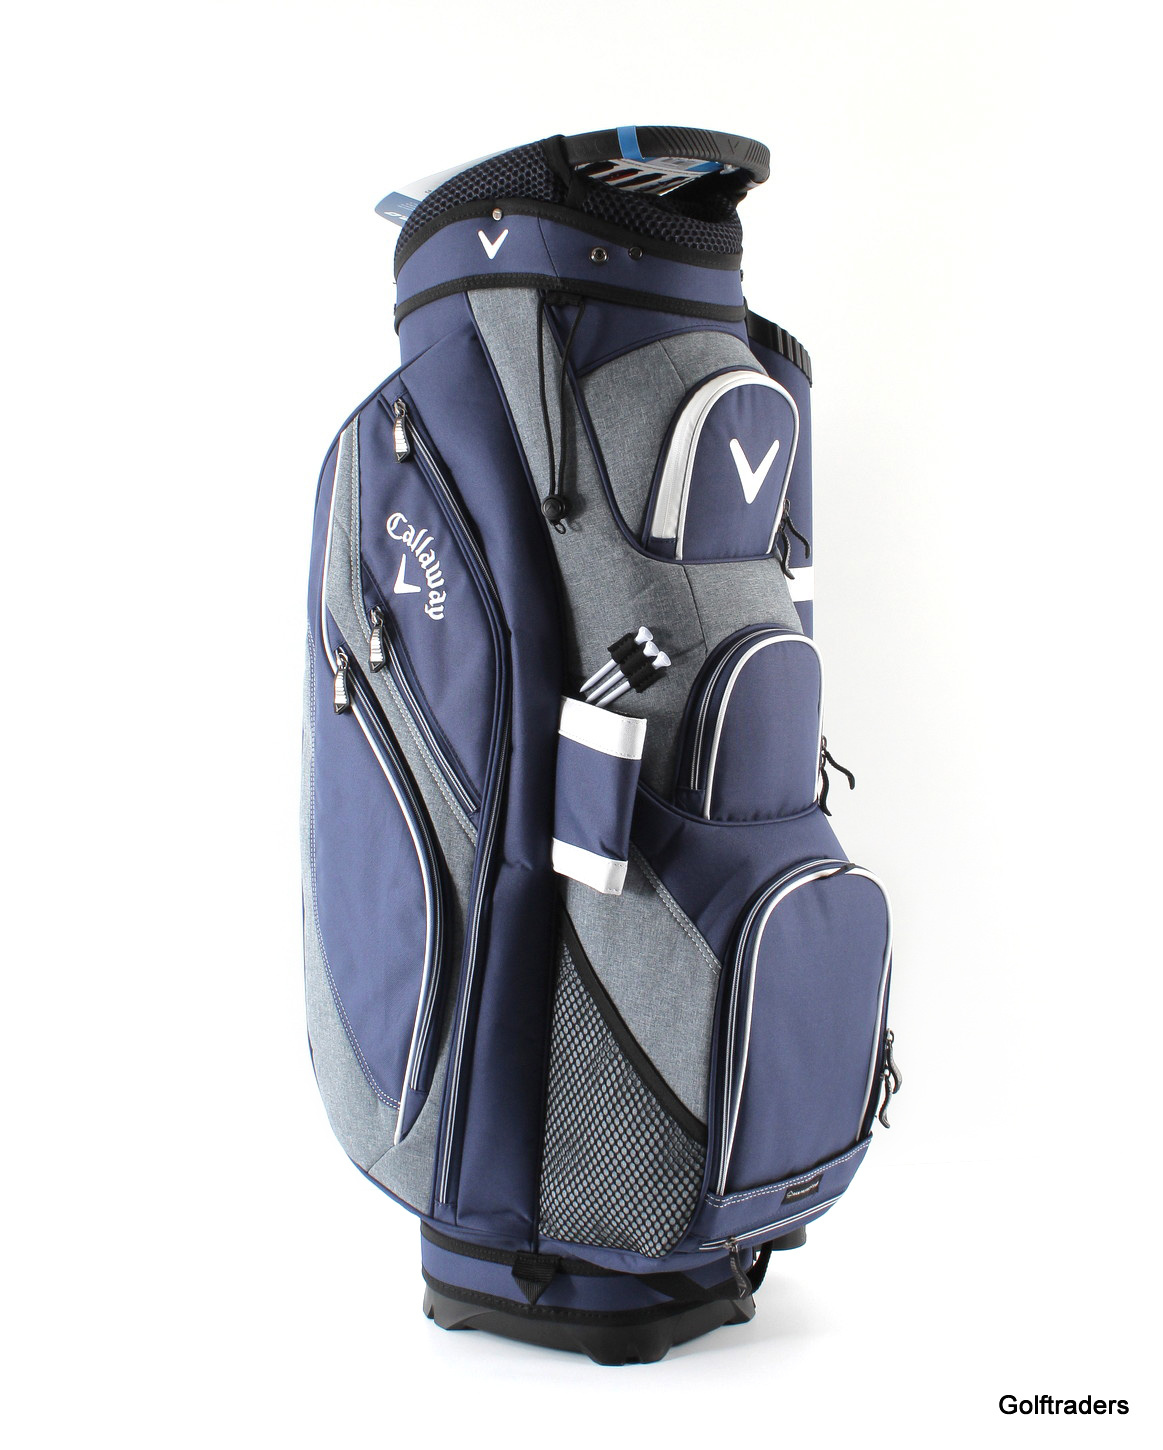 BUY GOLF BAG ONLINE, USED AND NEW